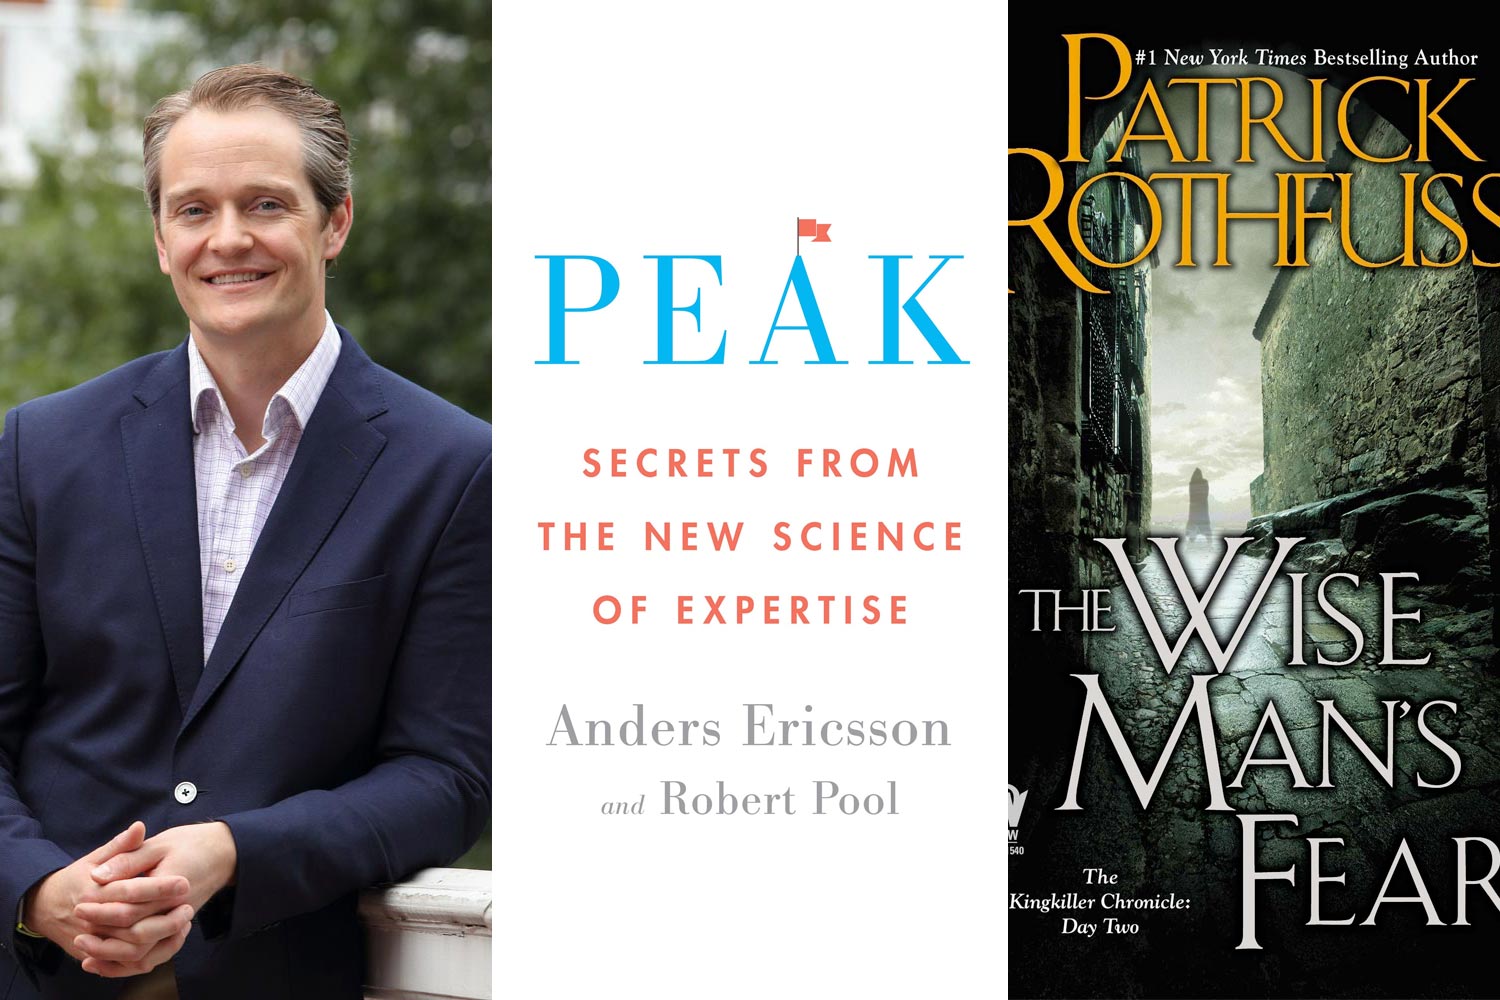 Left: headshot Sean Martin,  Middle: book cover that reads Peak Secrets from the new science of expertise anders ericsson and robert pool.  Right: book cover that reads Patrick Rothfuss the Wise man's Fear